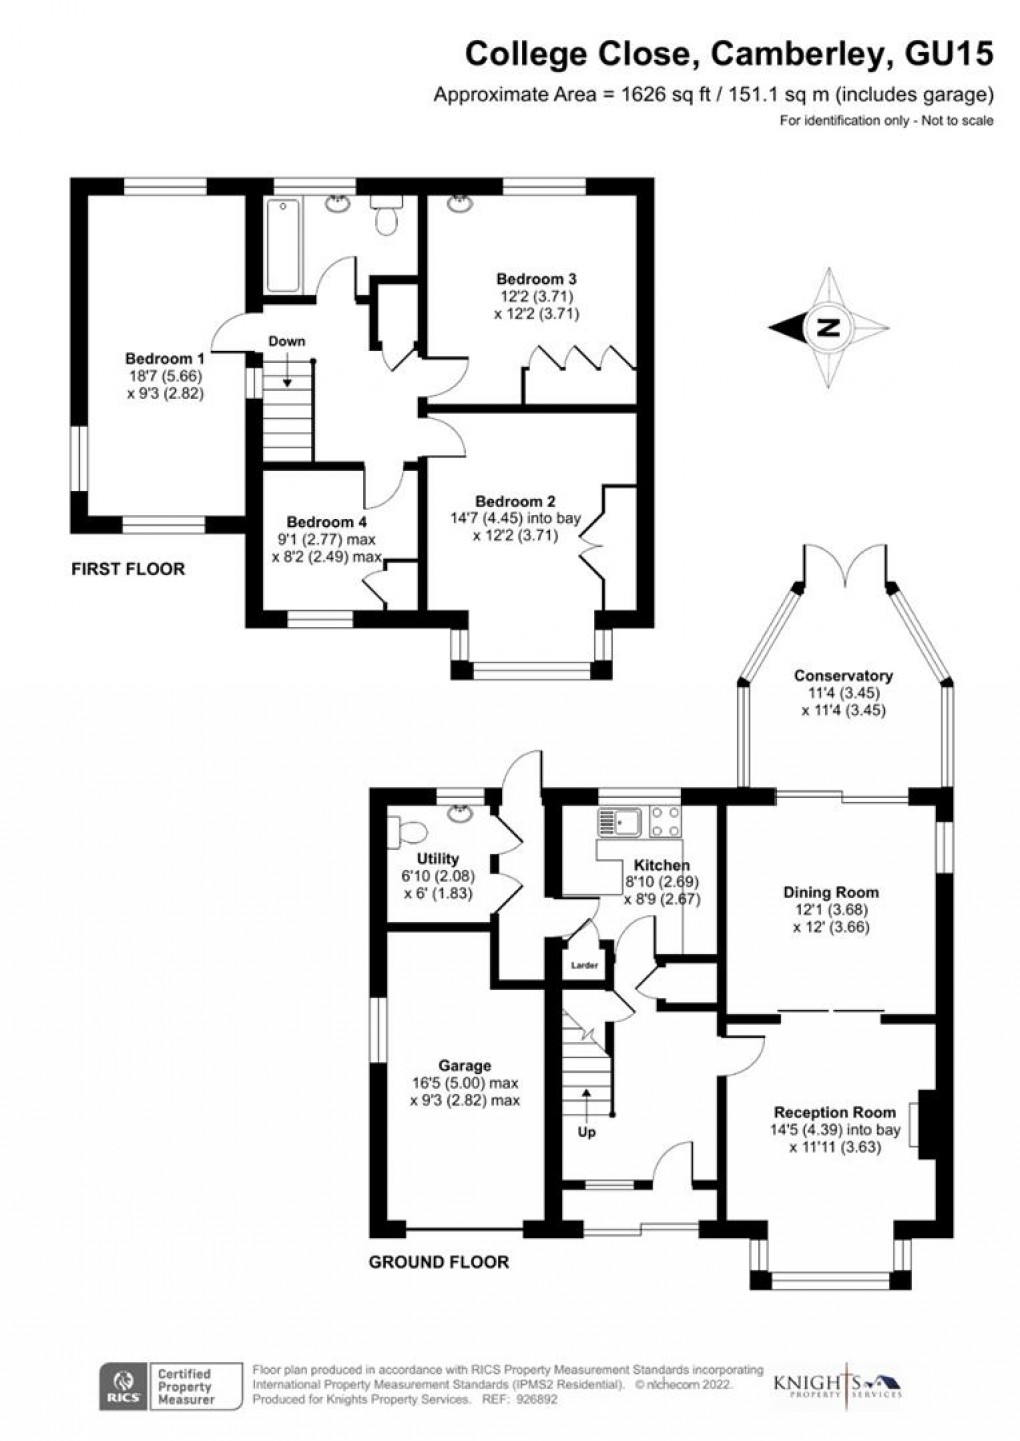 Floorplan for College Close, Camberley